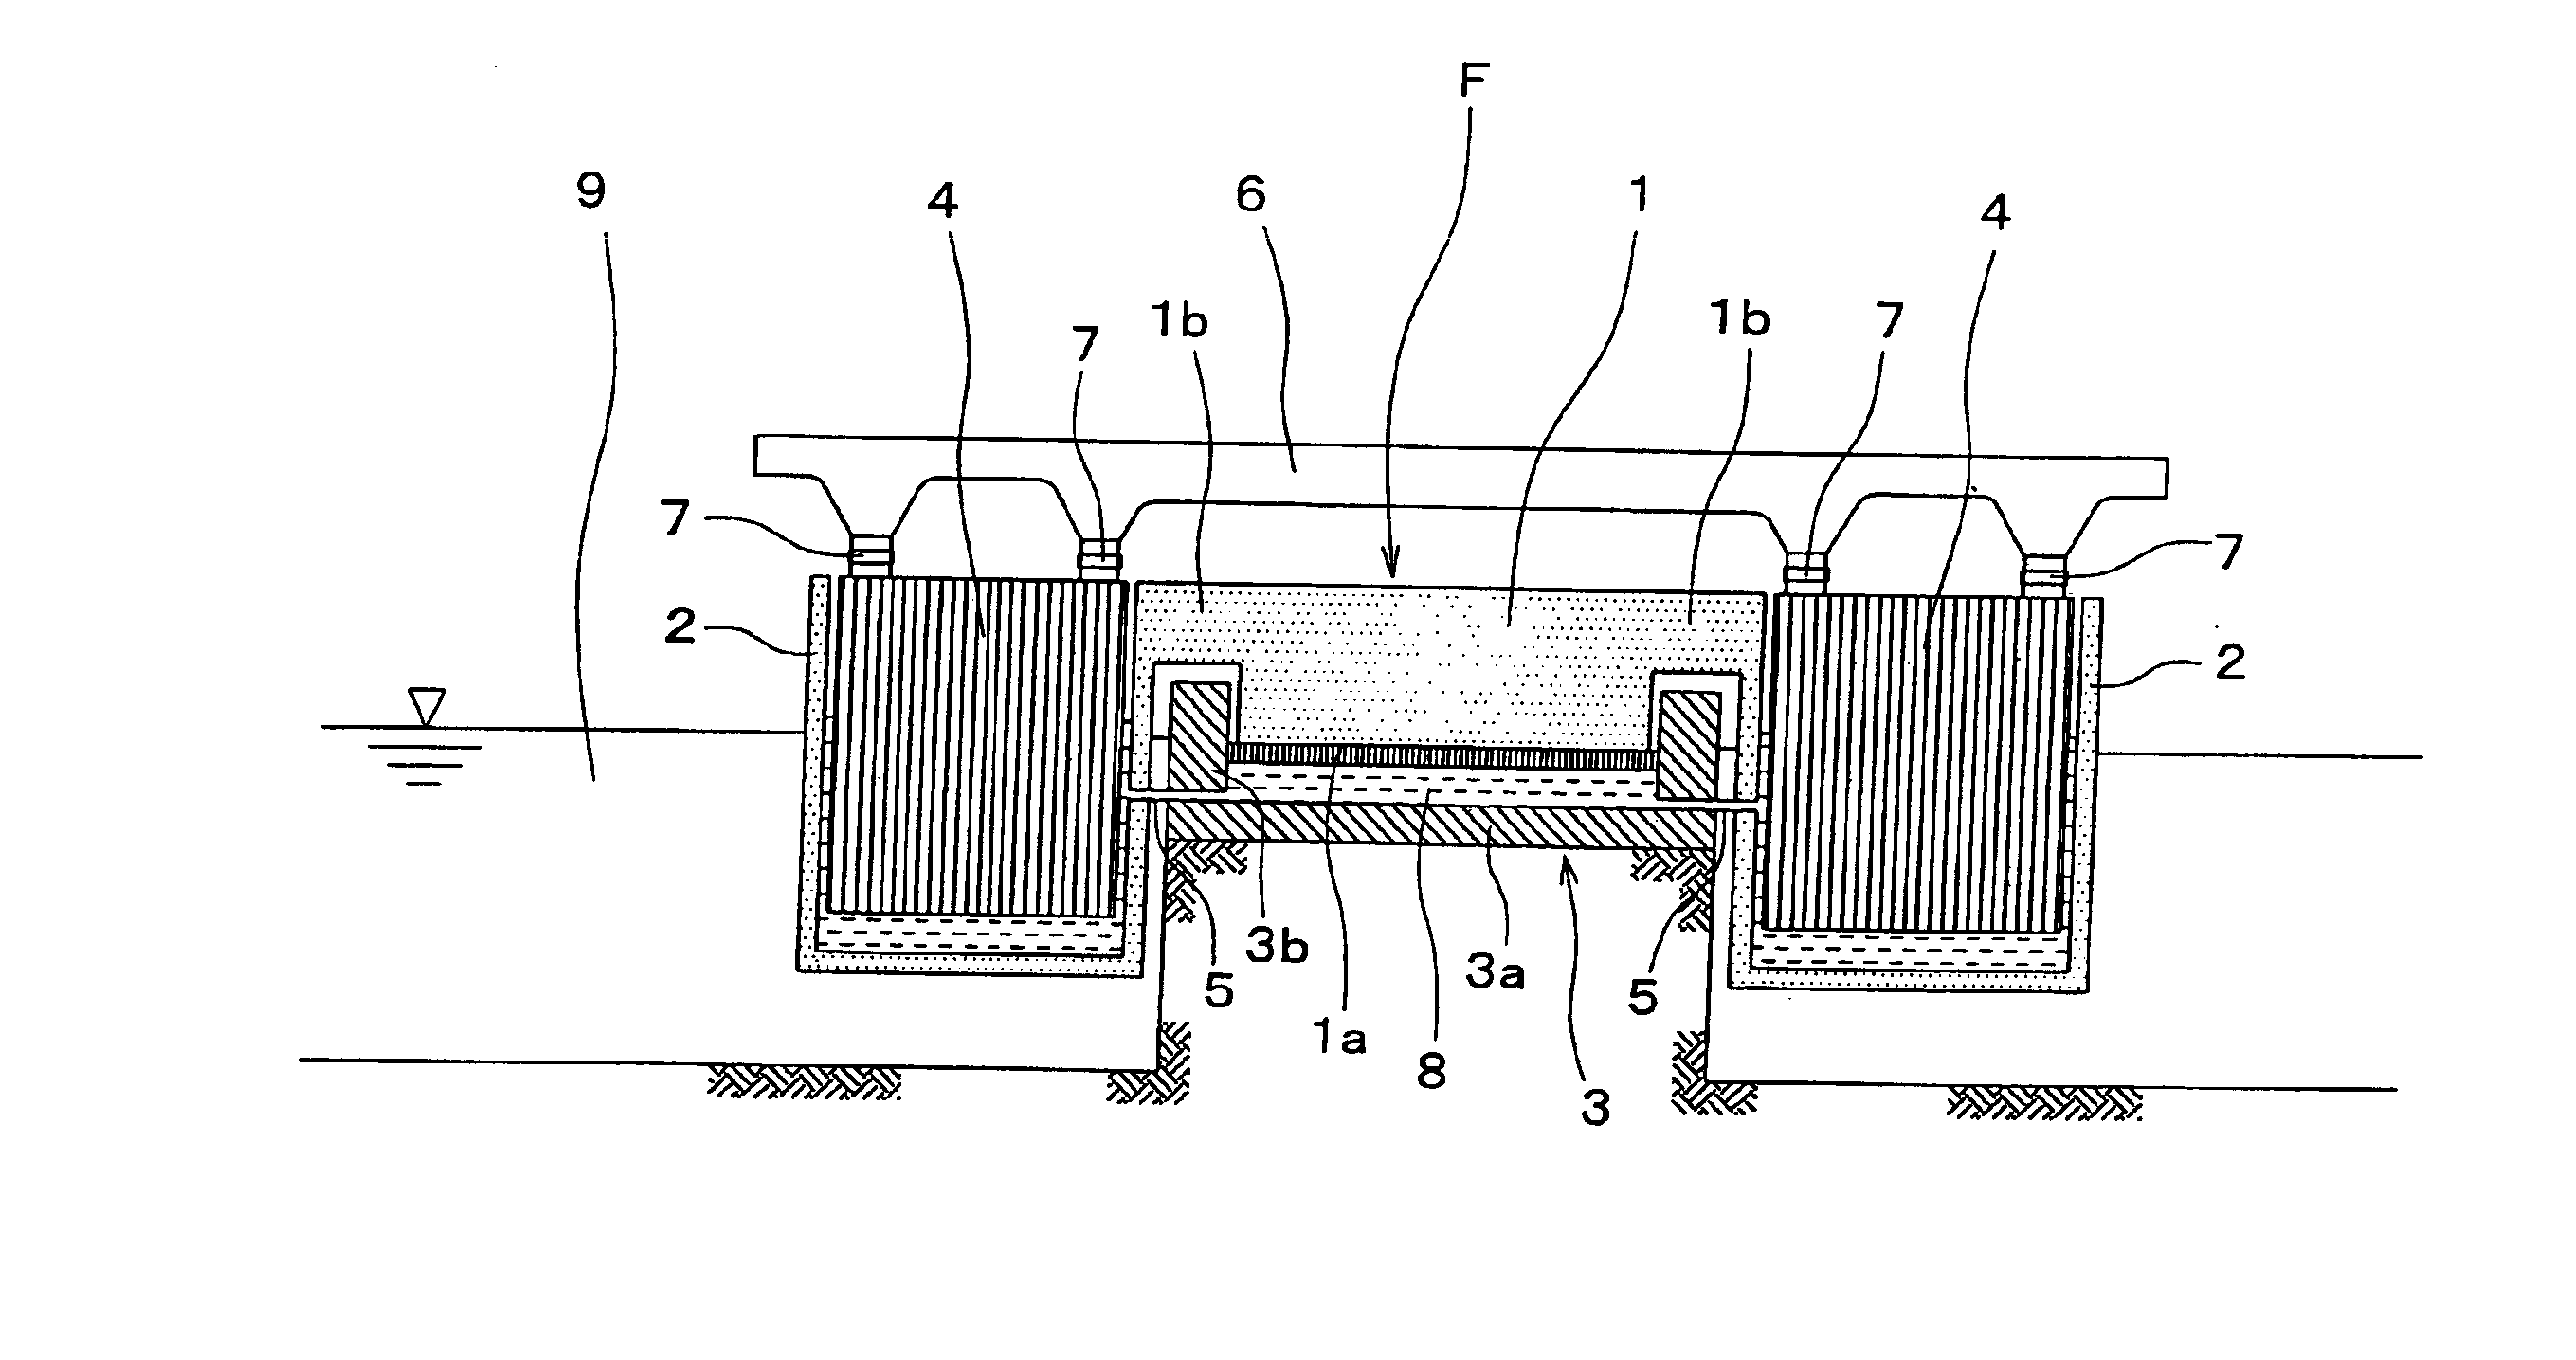 Automatic level-control floating apparatus